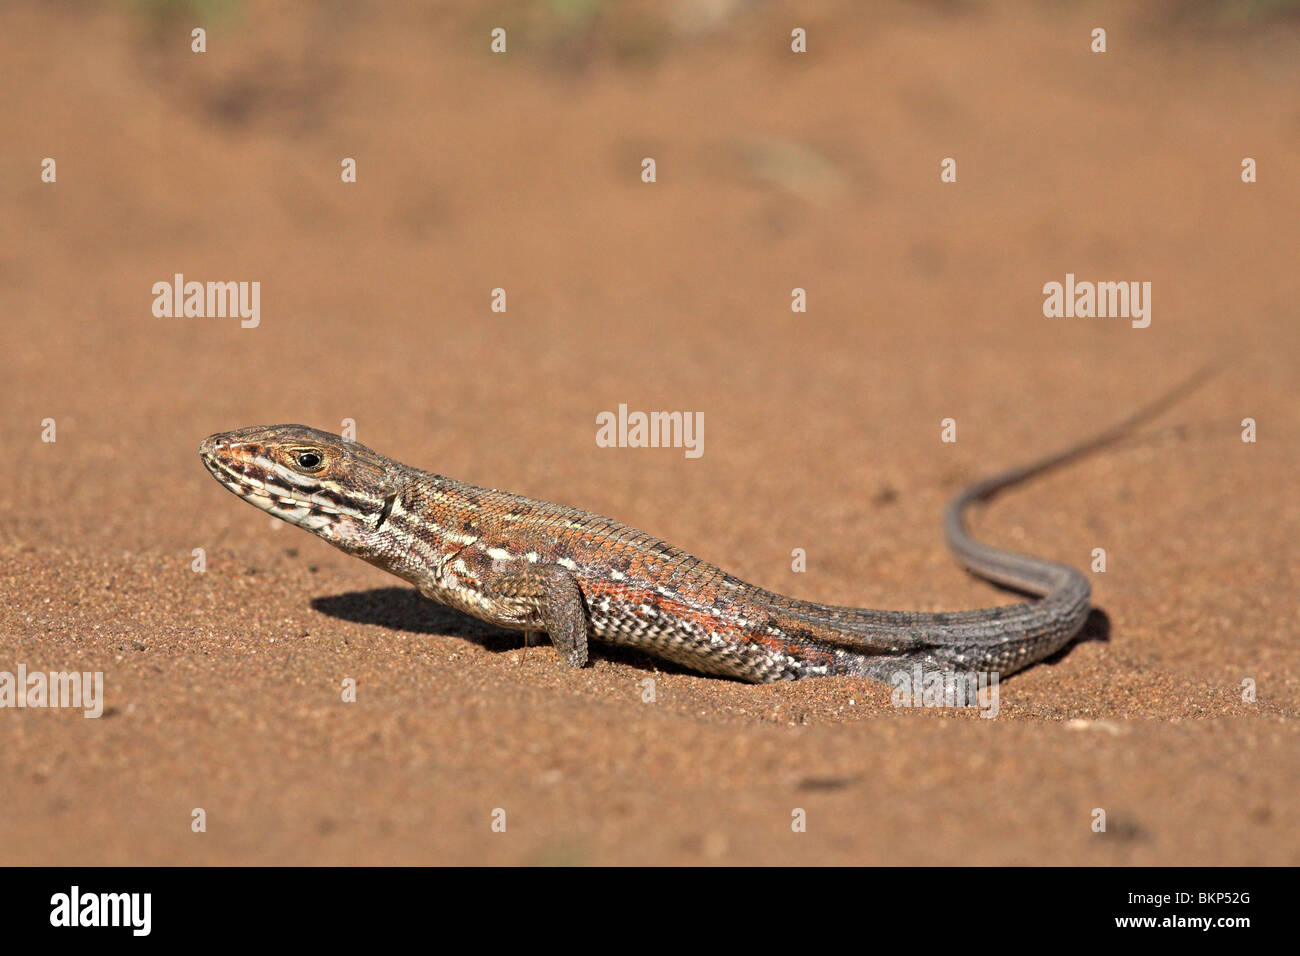 photo of the extremely fast common rough-scaled lizard on sand Stock Photo